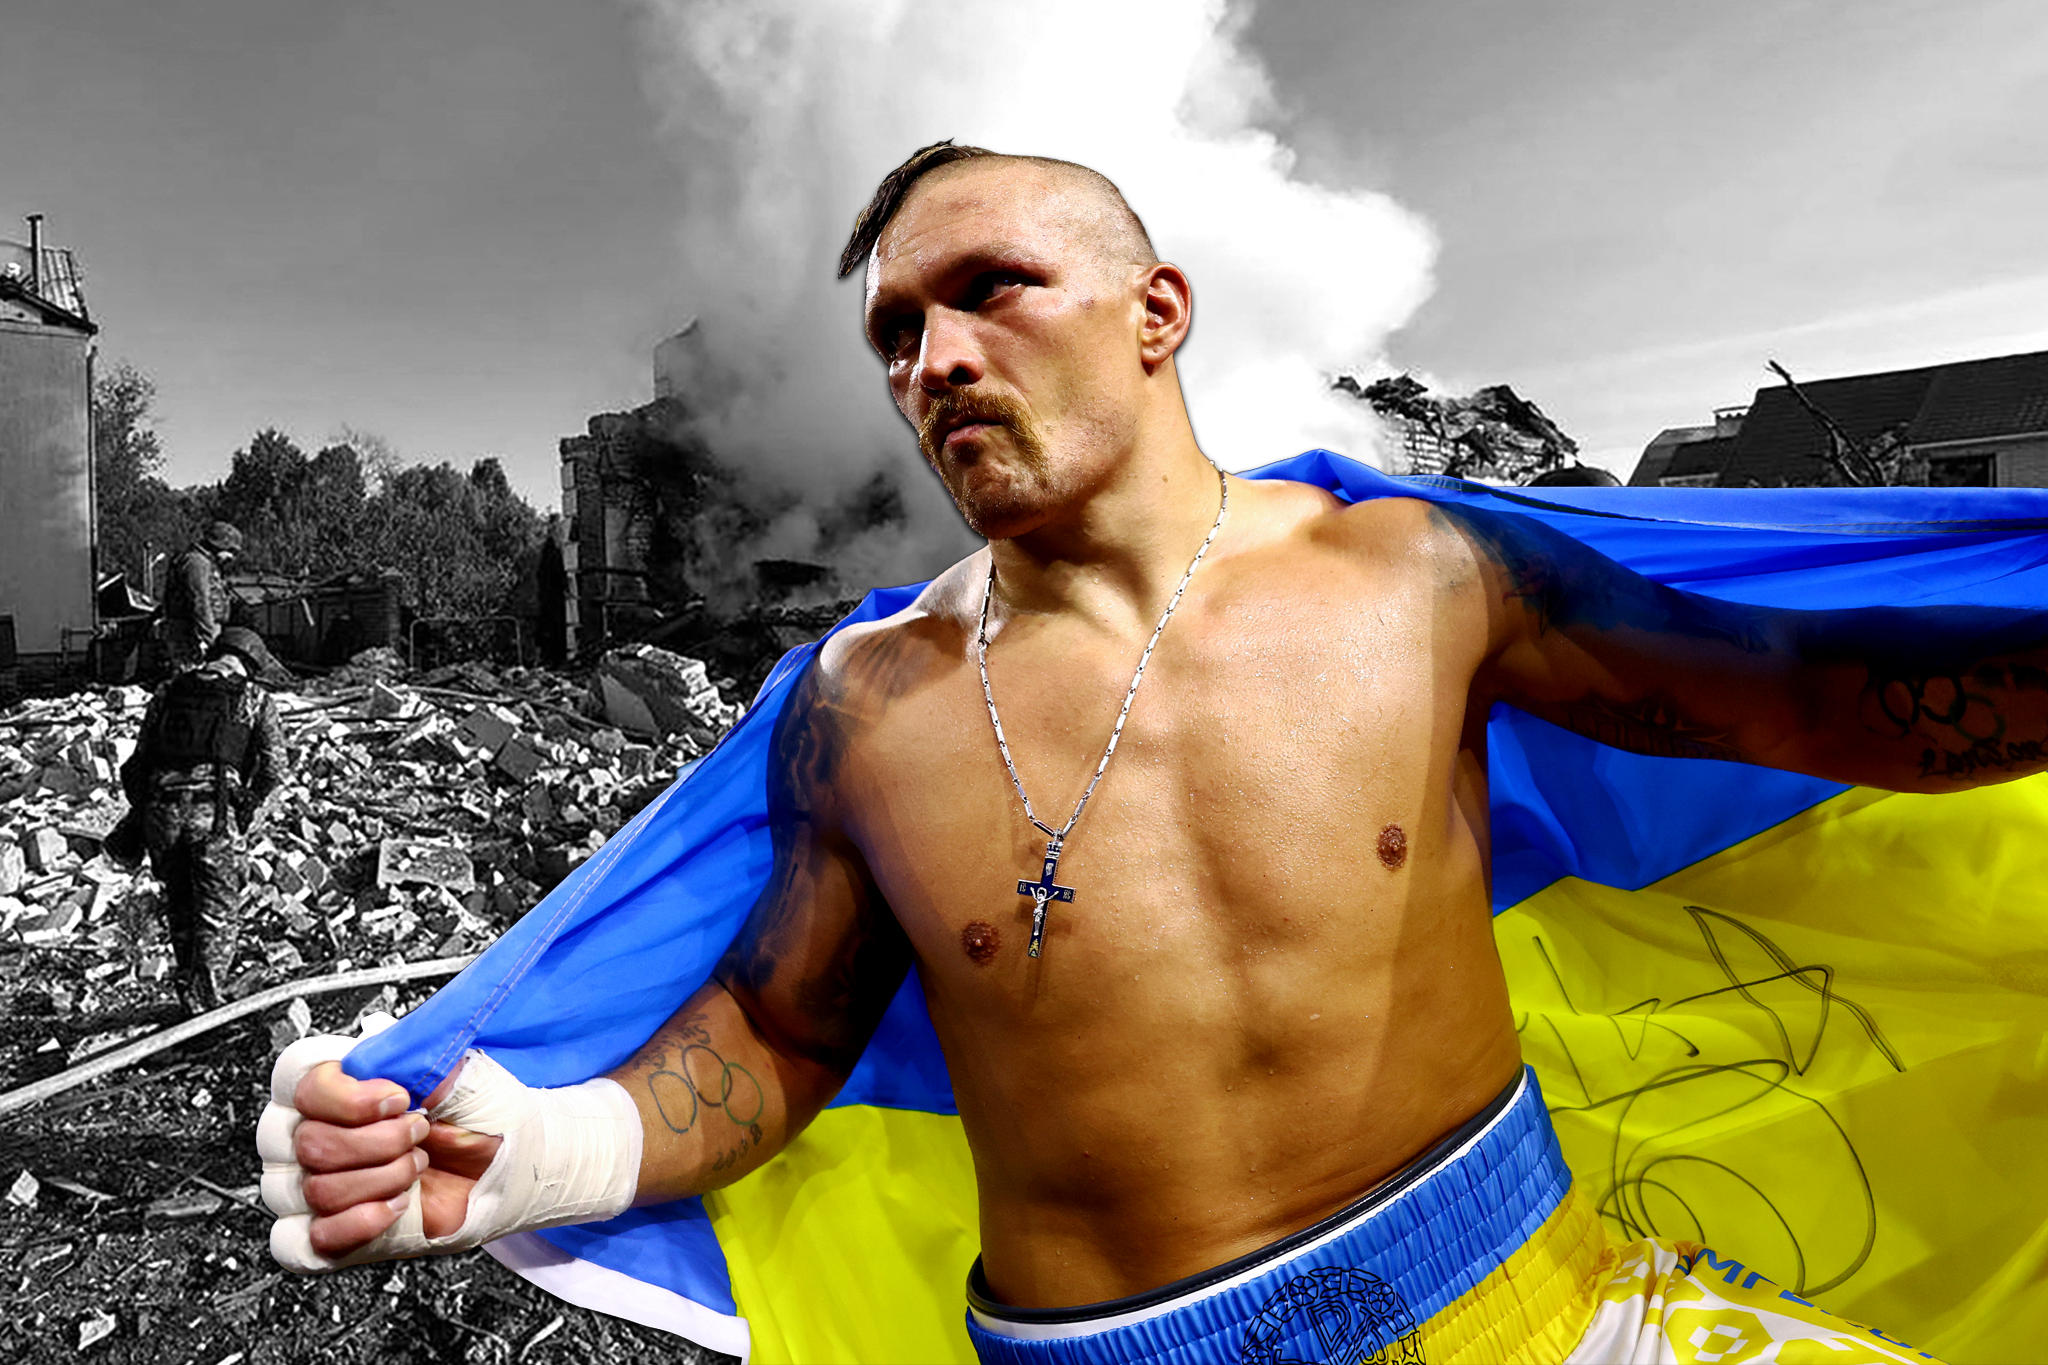 Oleksandr Usyk helped to defend his native Ukraine in 2022, serving on the frontline